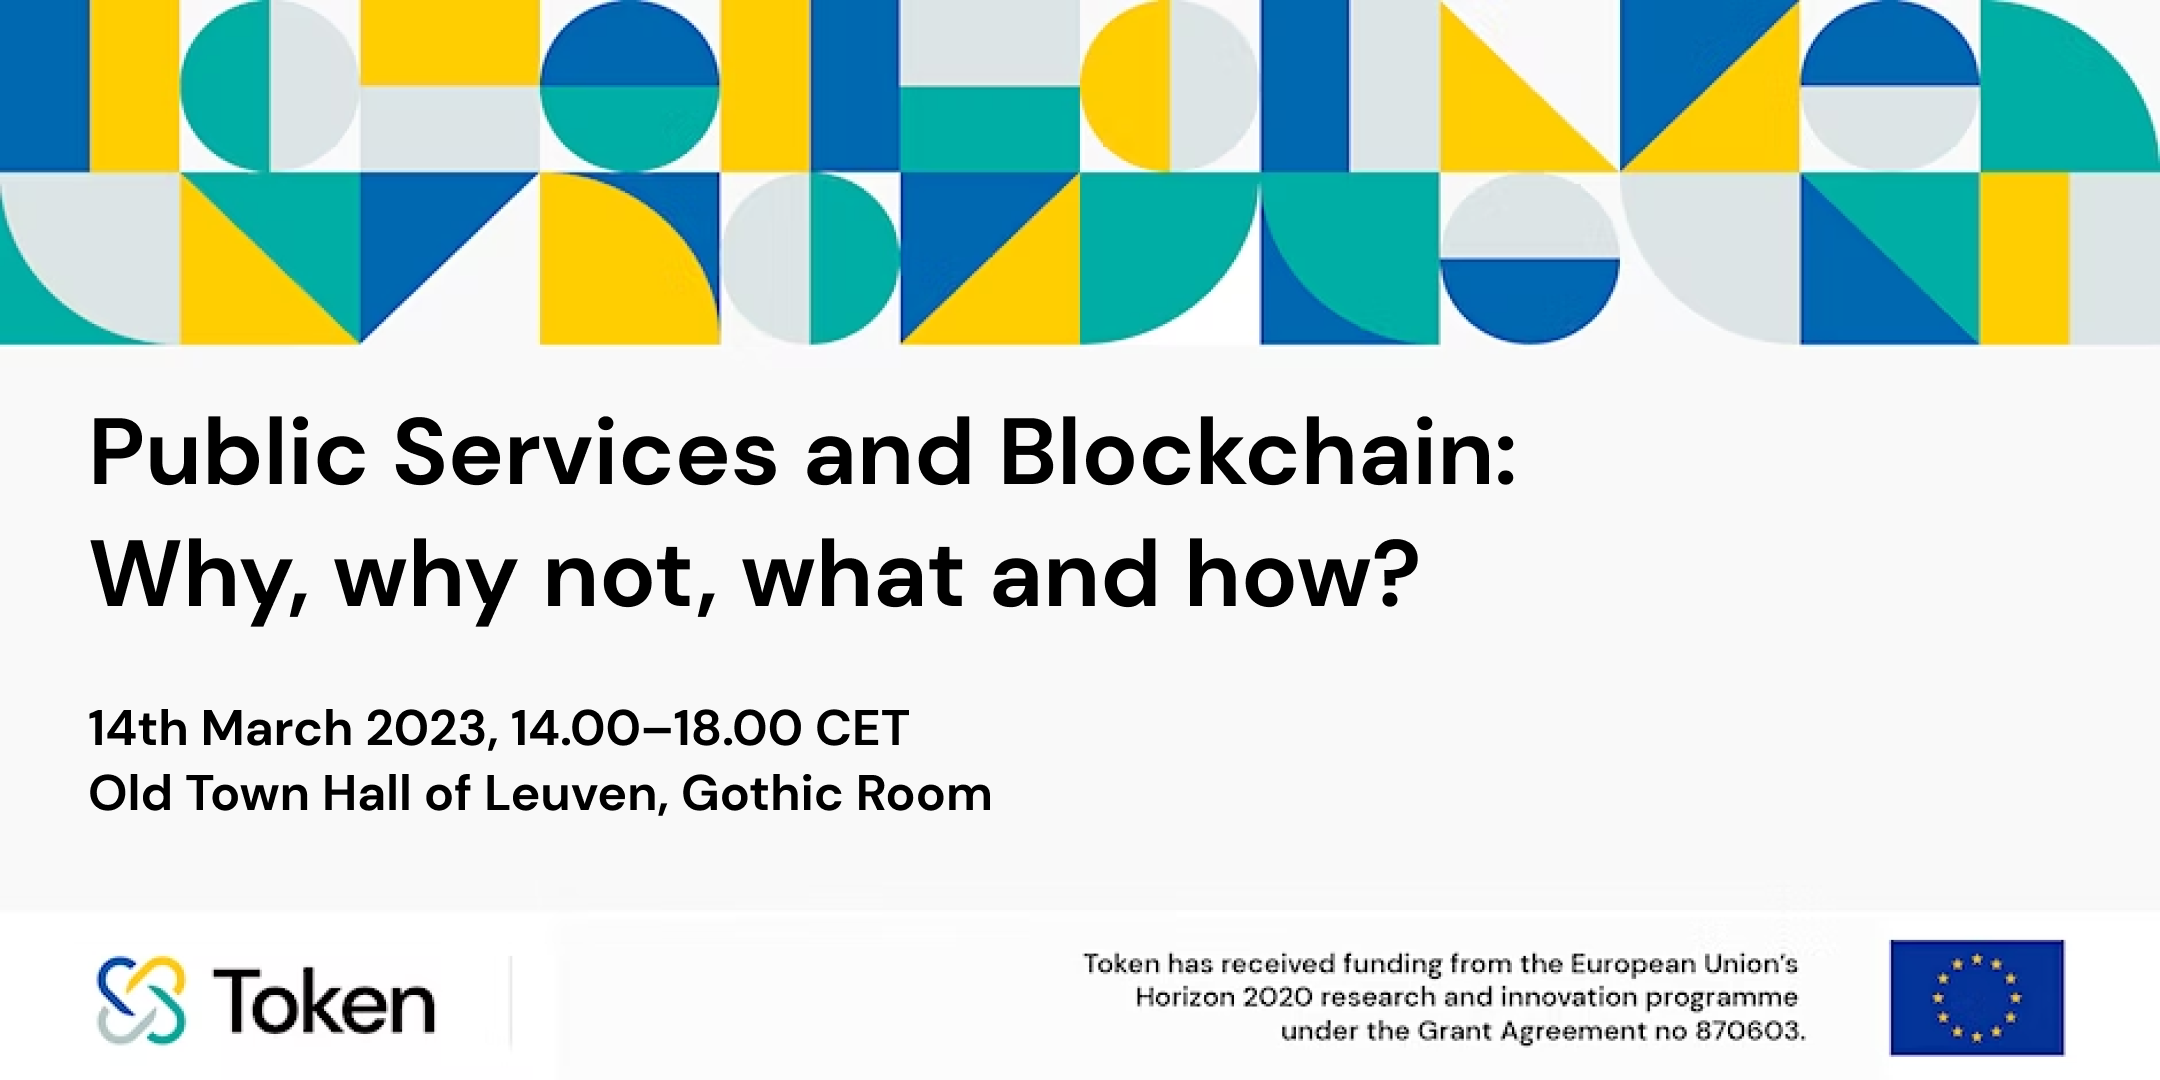 Event recap: Public Services and Blockchain: Why, why not, what and how?